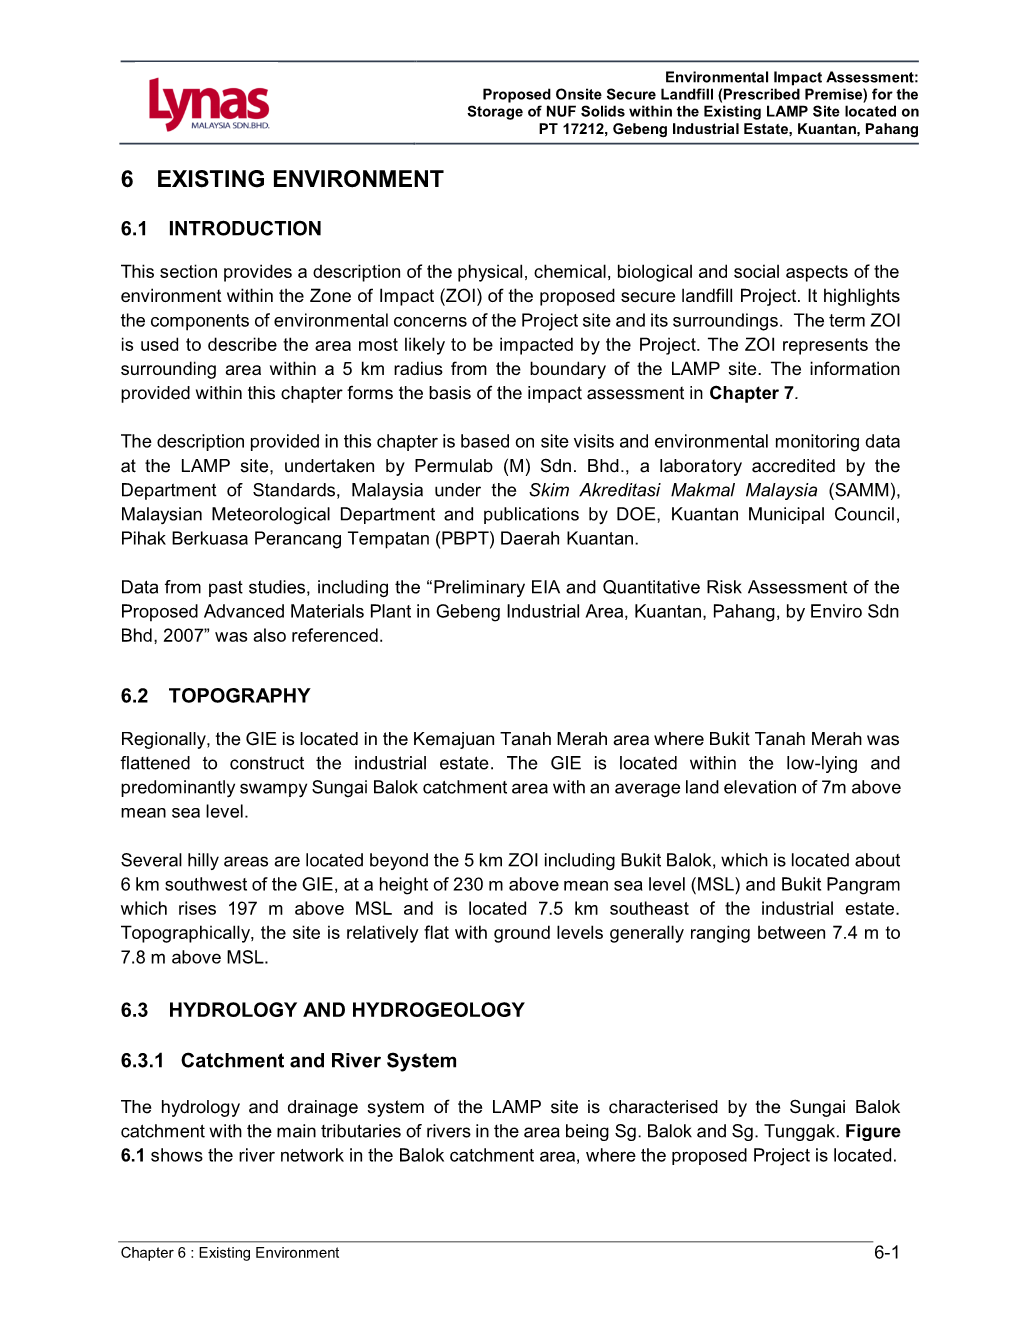 6 Existing Environment